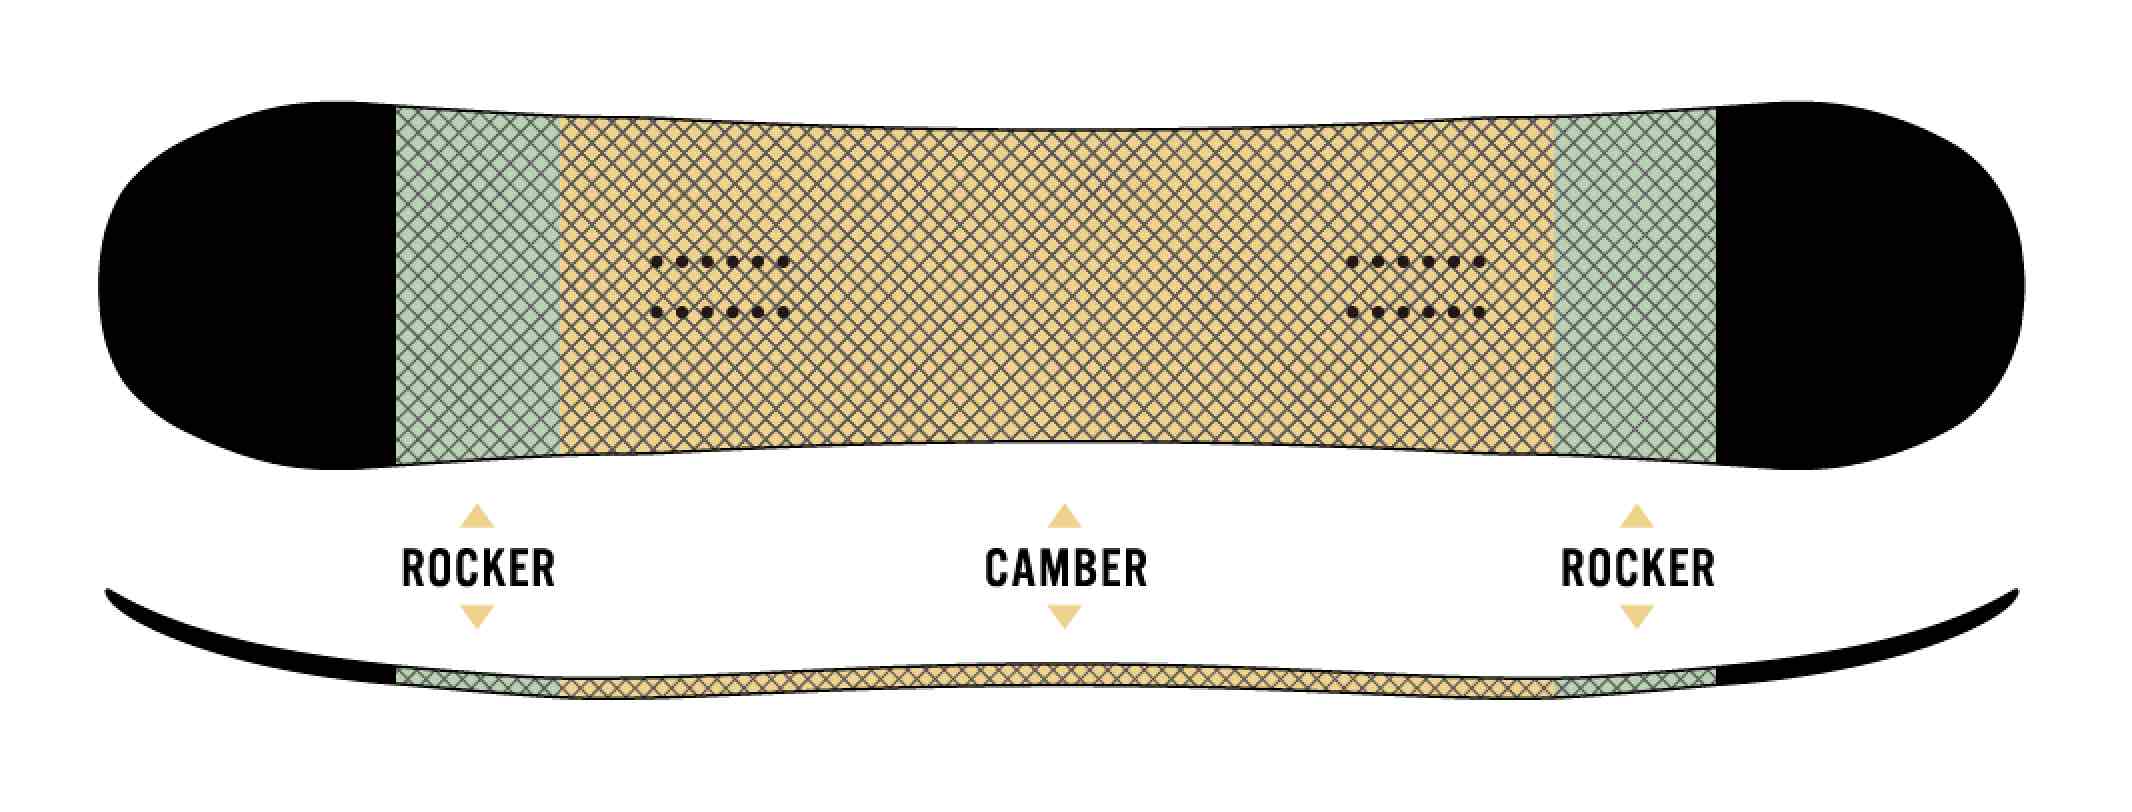 The center part of the board is camber, and CAMROCK with a little rocker on the nose and tail.It has the sharp edging that camber is good at, high repulsive force, and the good maneuverability peculiar to rockers.